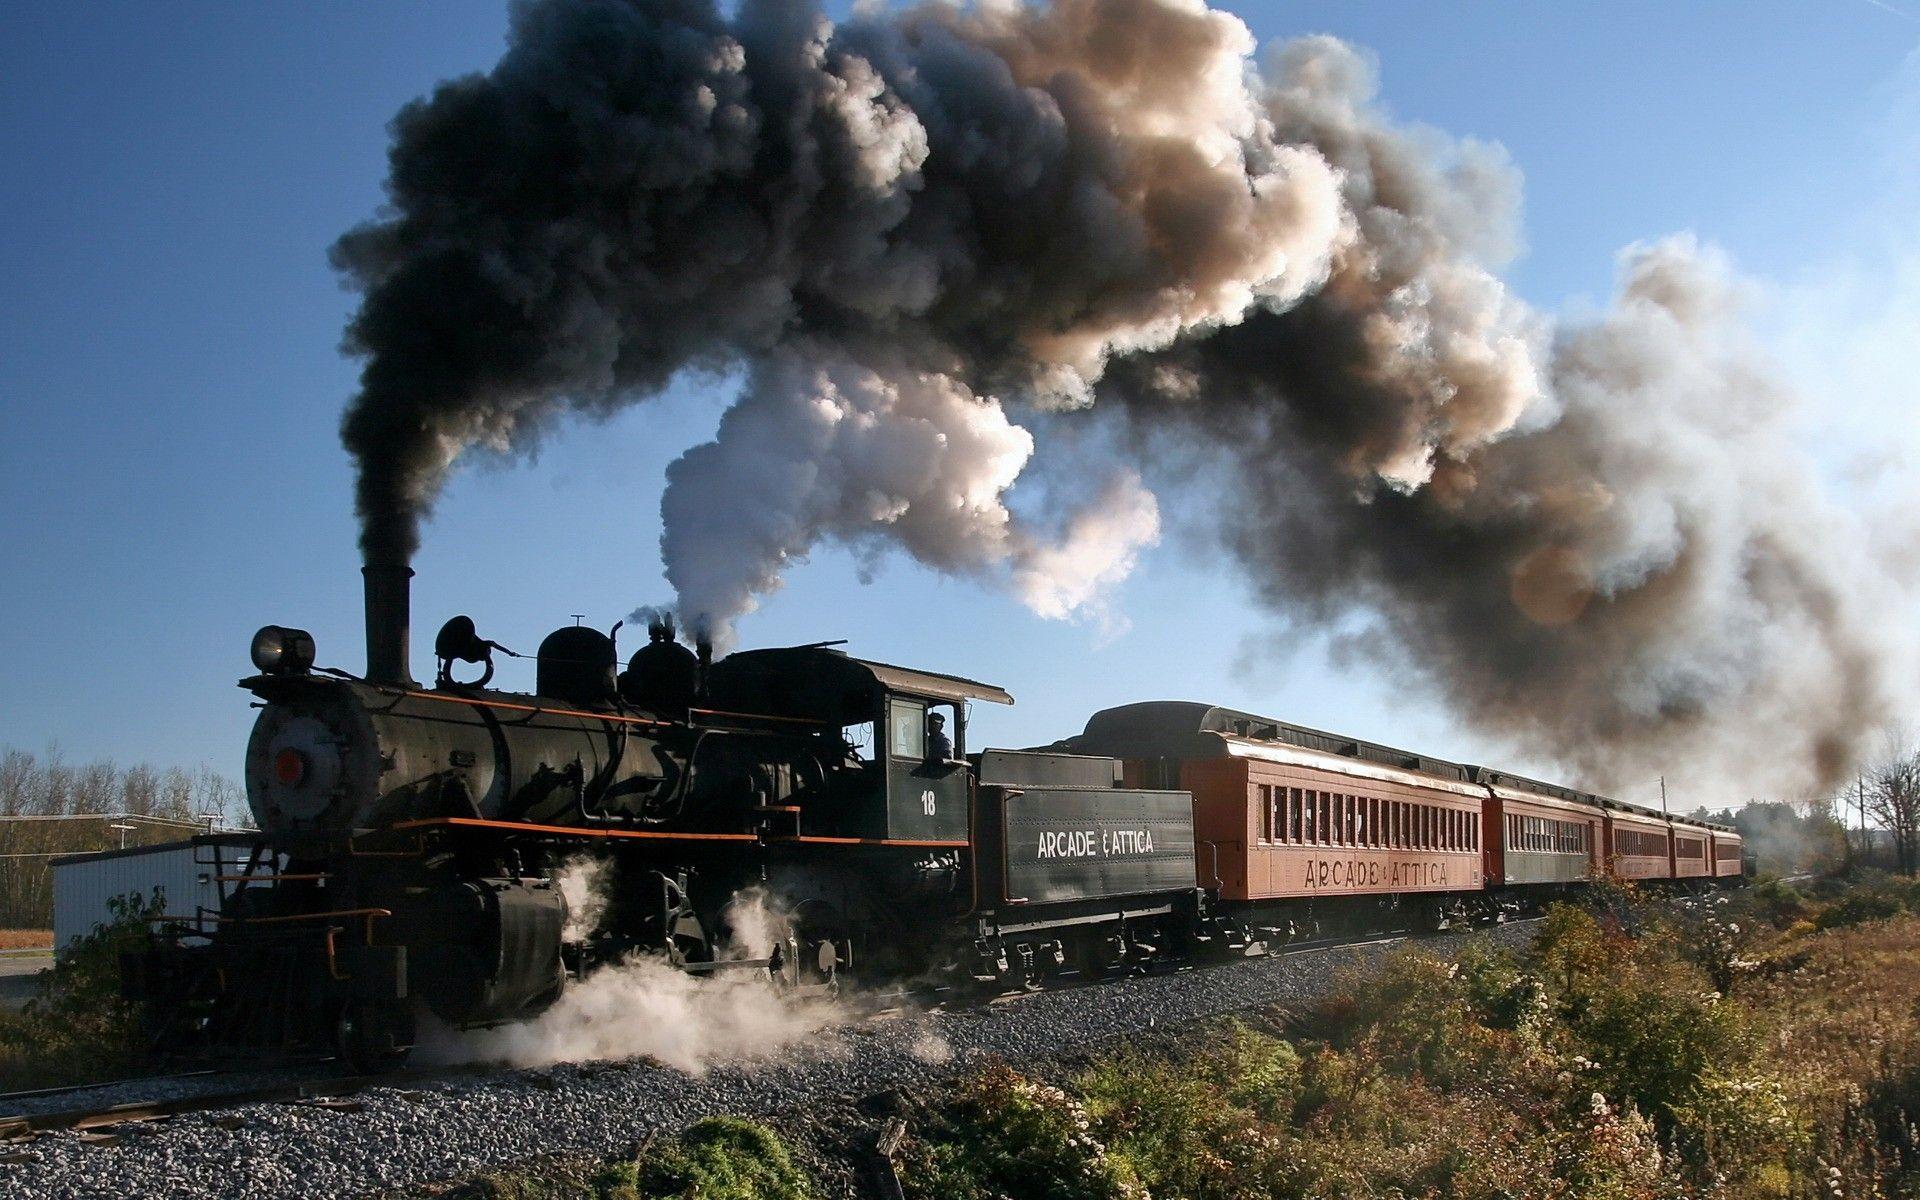 train picture. Full View and Download Steam Train Wallpaper